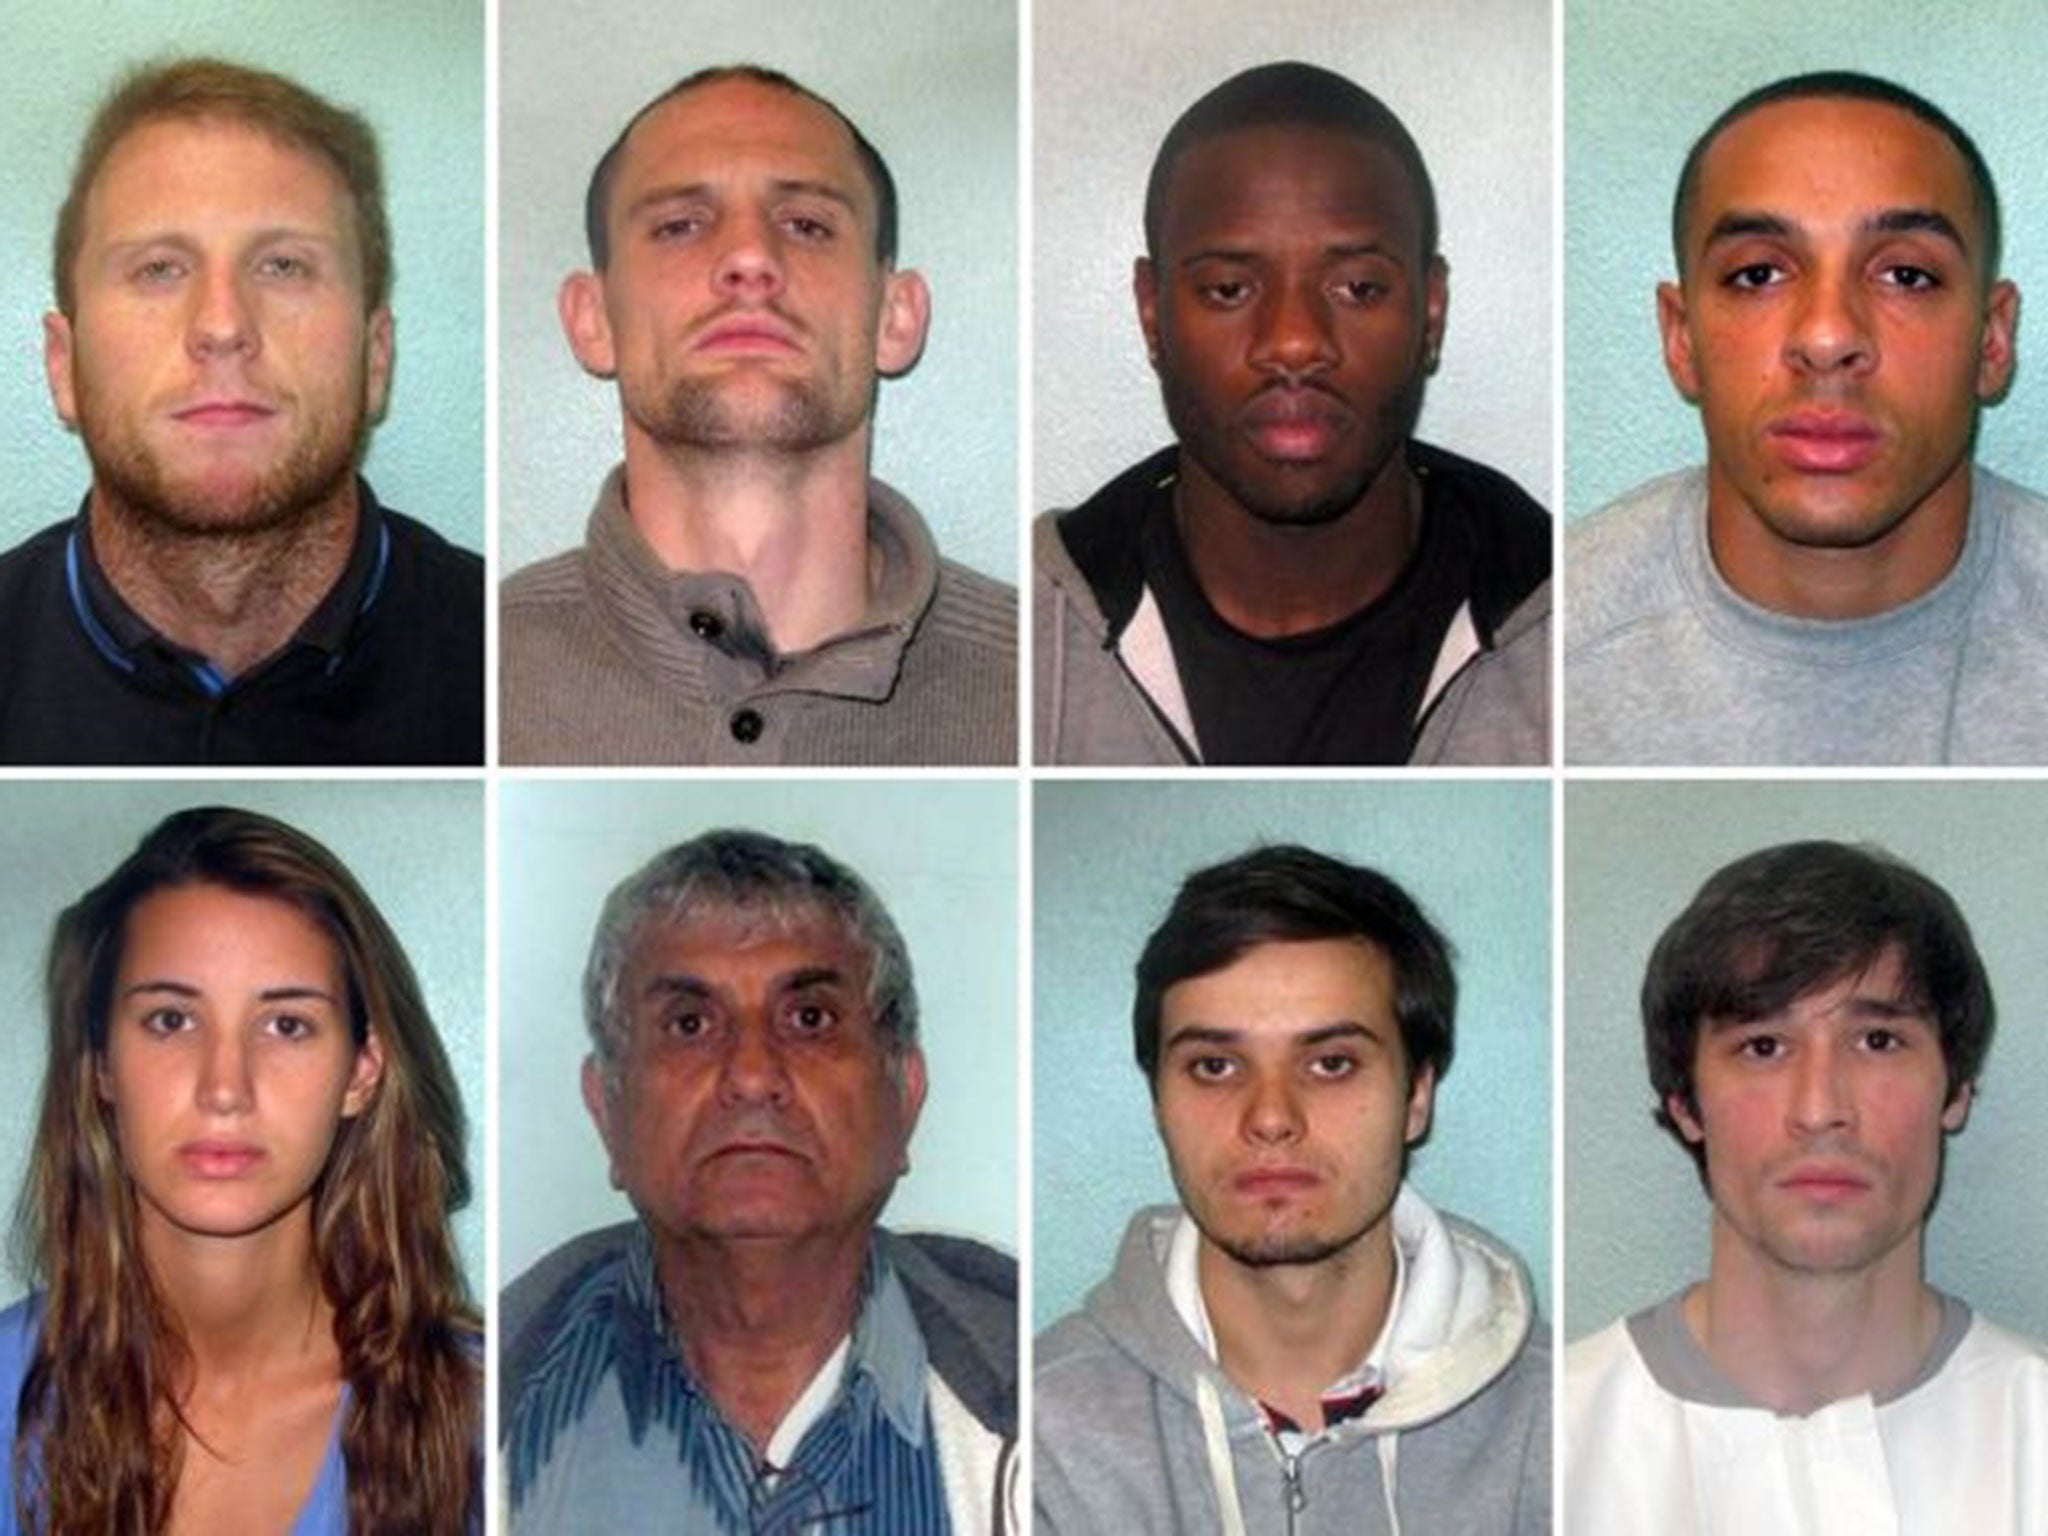 (Top row, from the left) Reece Dunford, David Mays, Vincent Kamara, Danny St Luce and (bottom row, from left) Hollie Dowding, Yair Cohen, Patrick Spencer O'Brien and Boz Burbridge, a gang of robbers who have been convicted after they were involved in a st